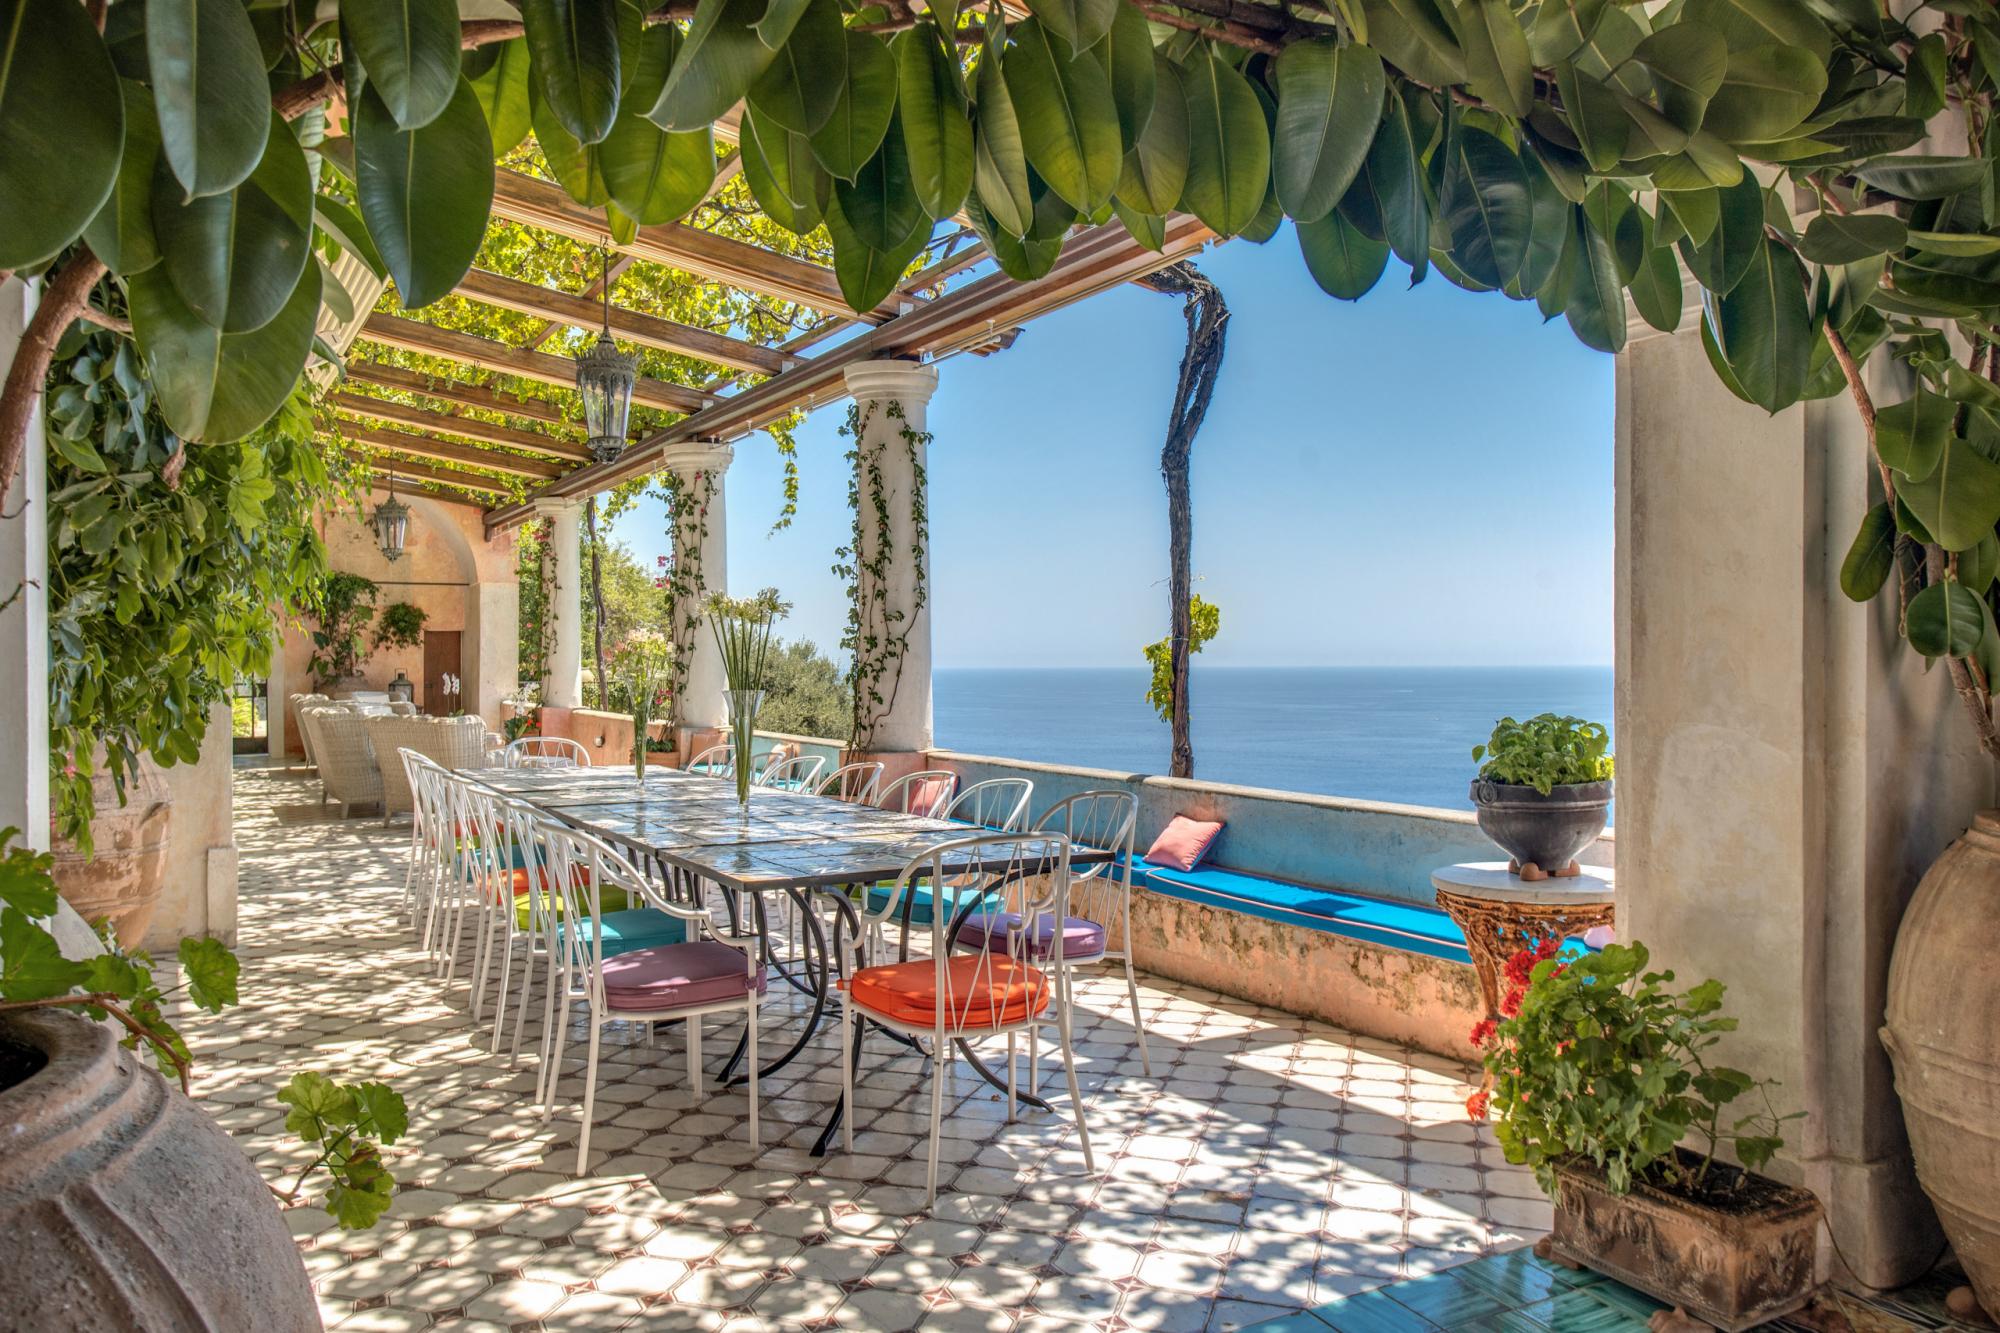 Property Image 2 - Enchanting 1741 Villa with Pool Overlooking the Sea